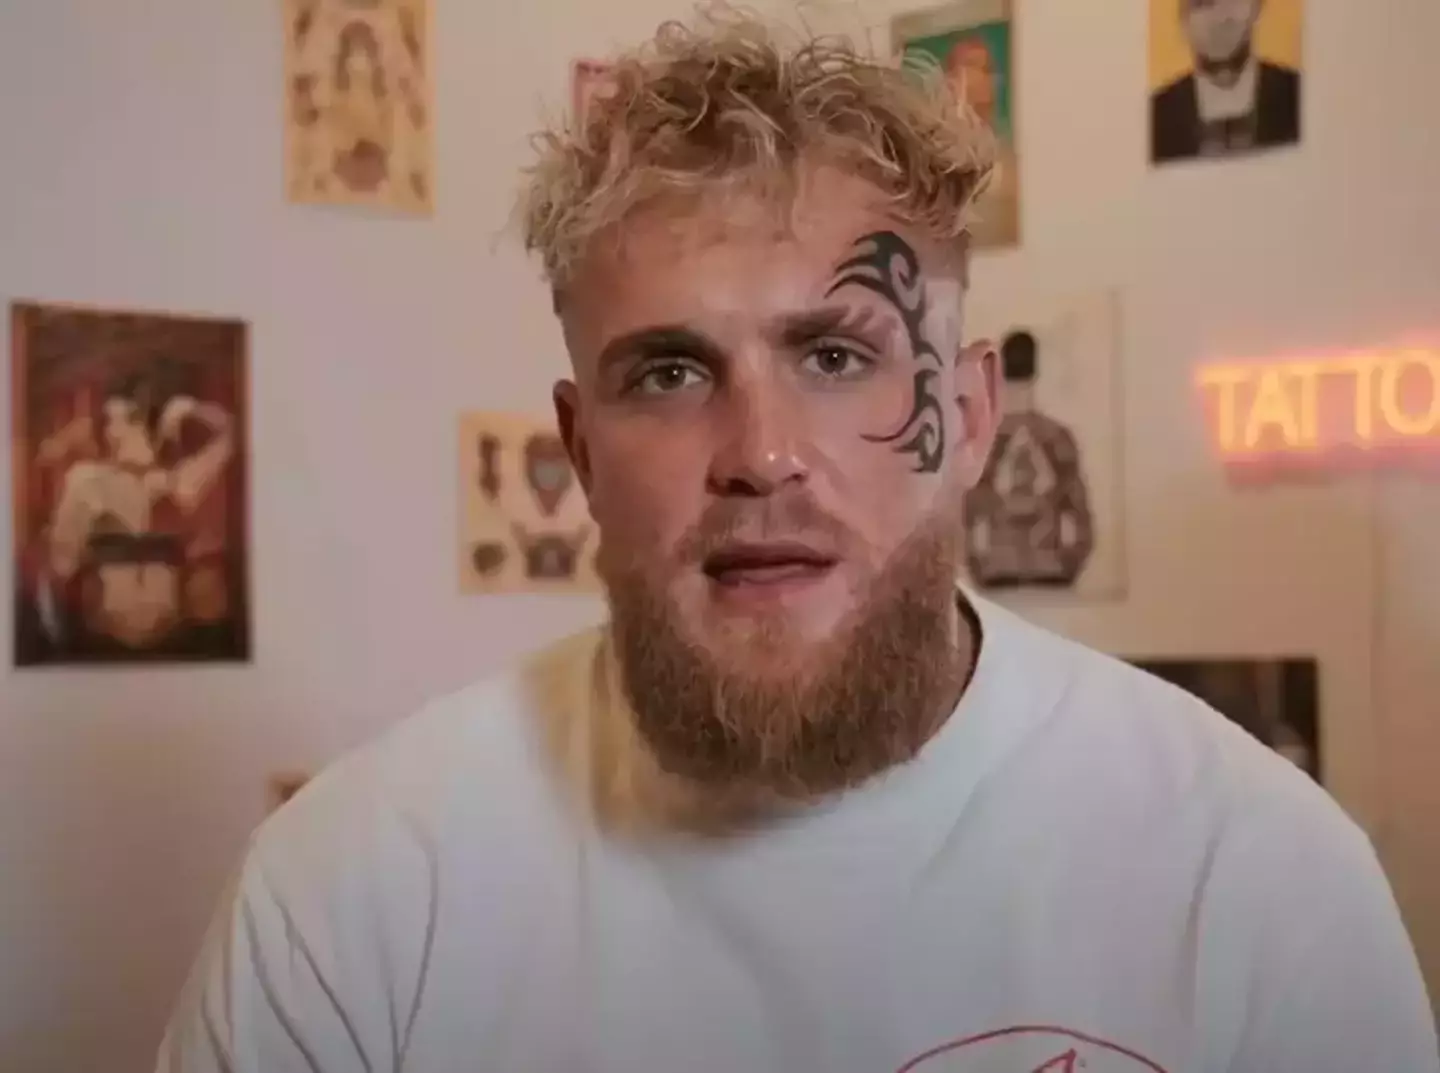 Jake Paul is set to step into the ring with Mike Tyson.